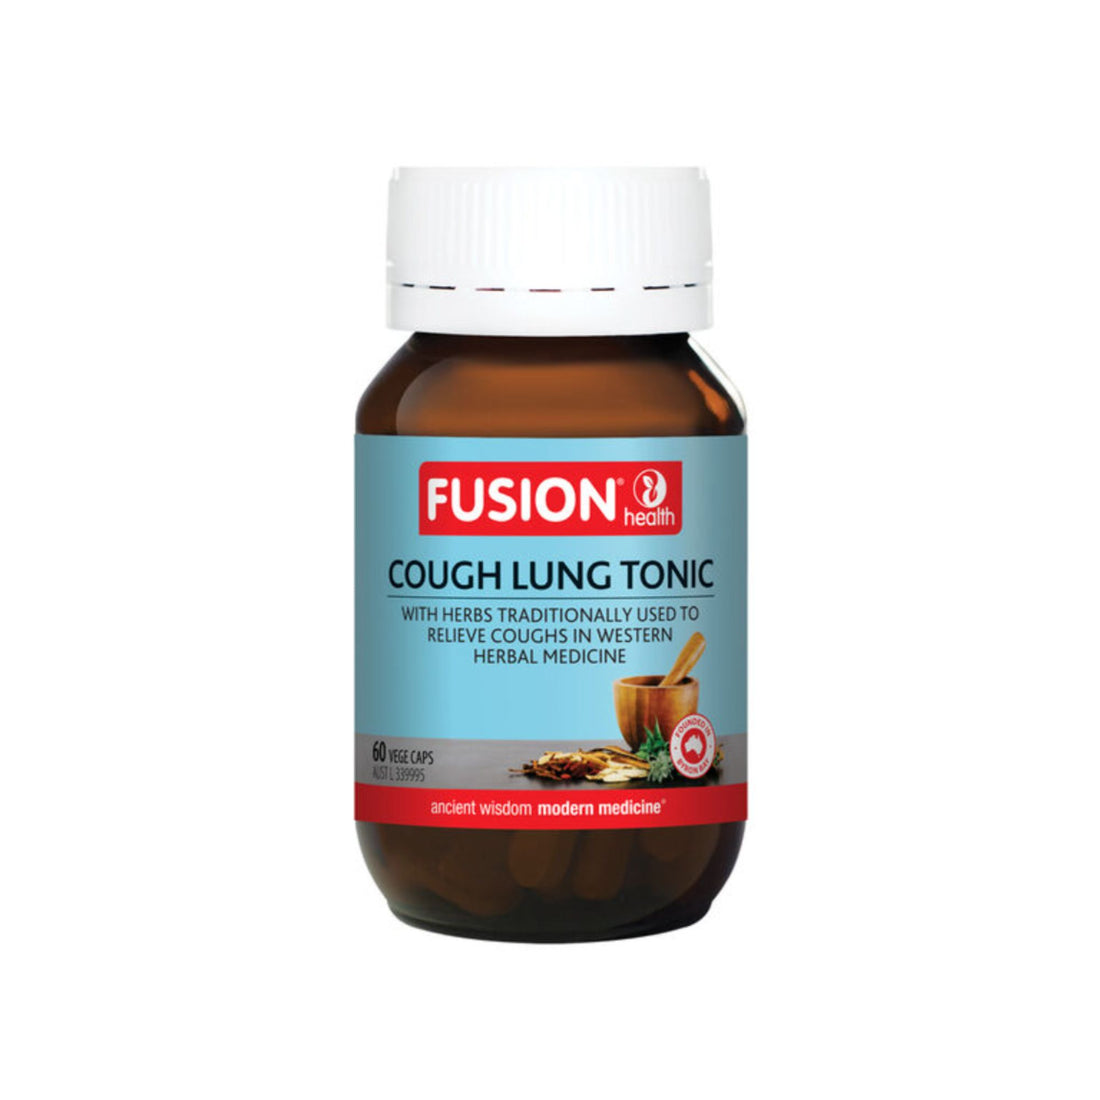 Fusion Health Cough Lung Tonic Capsule